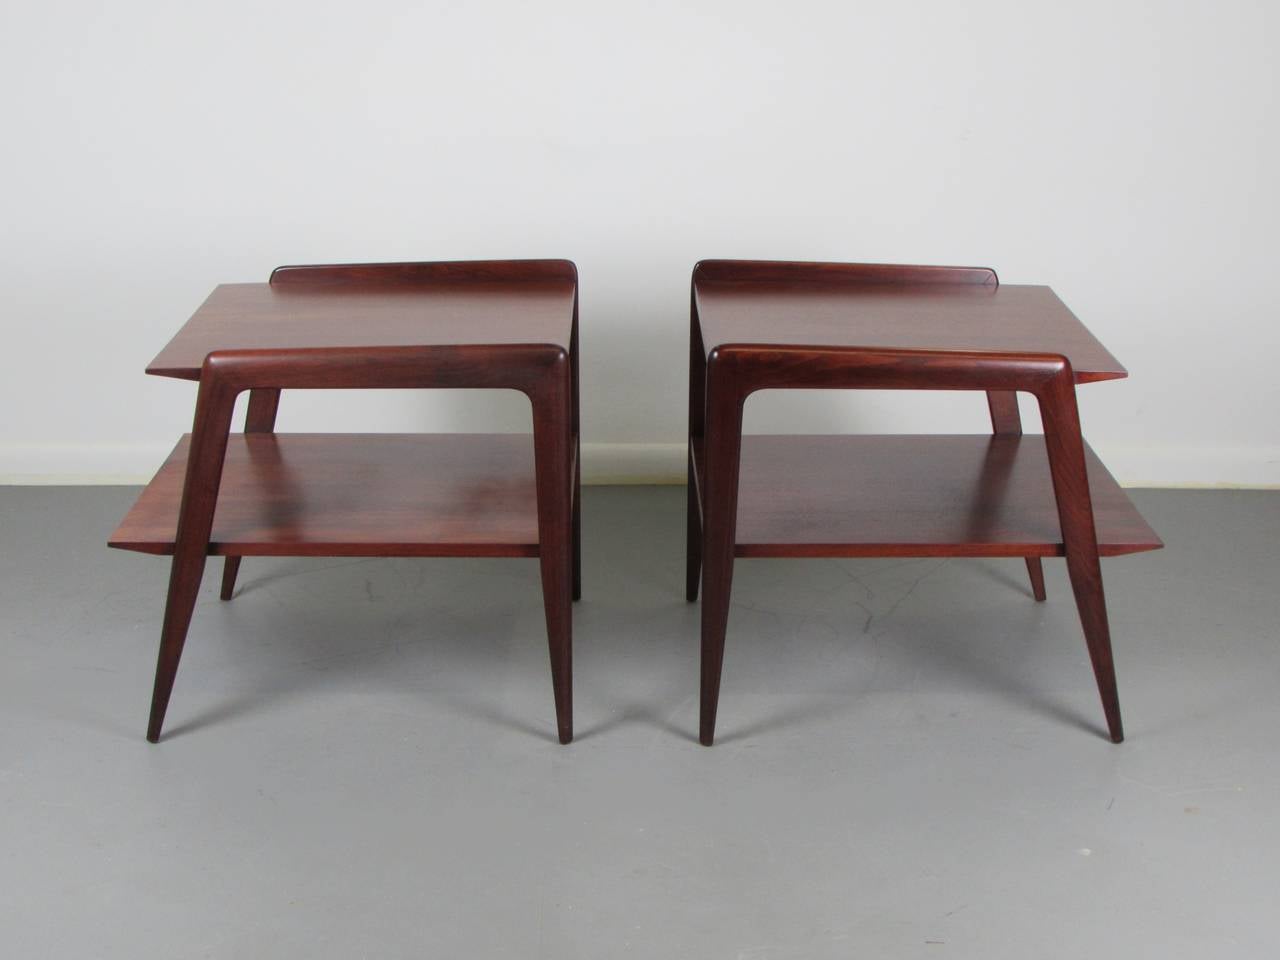 Rare and wicked pair of end tables by M. Singer & Sons, c1950. Attributed to Gio Ponti. Superb quality in solid mahogany. Incredible design and detail. Legendary Italian designers such as Carlo Di Carli, Gio Ponti, and Ico Parisi designed for Singer